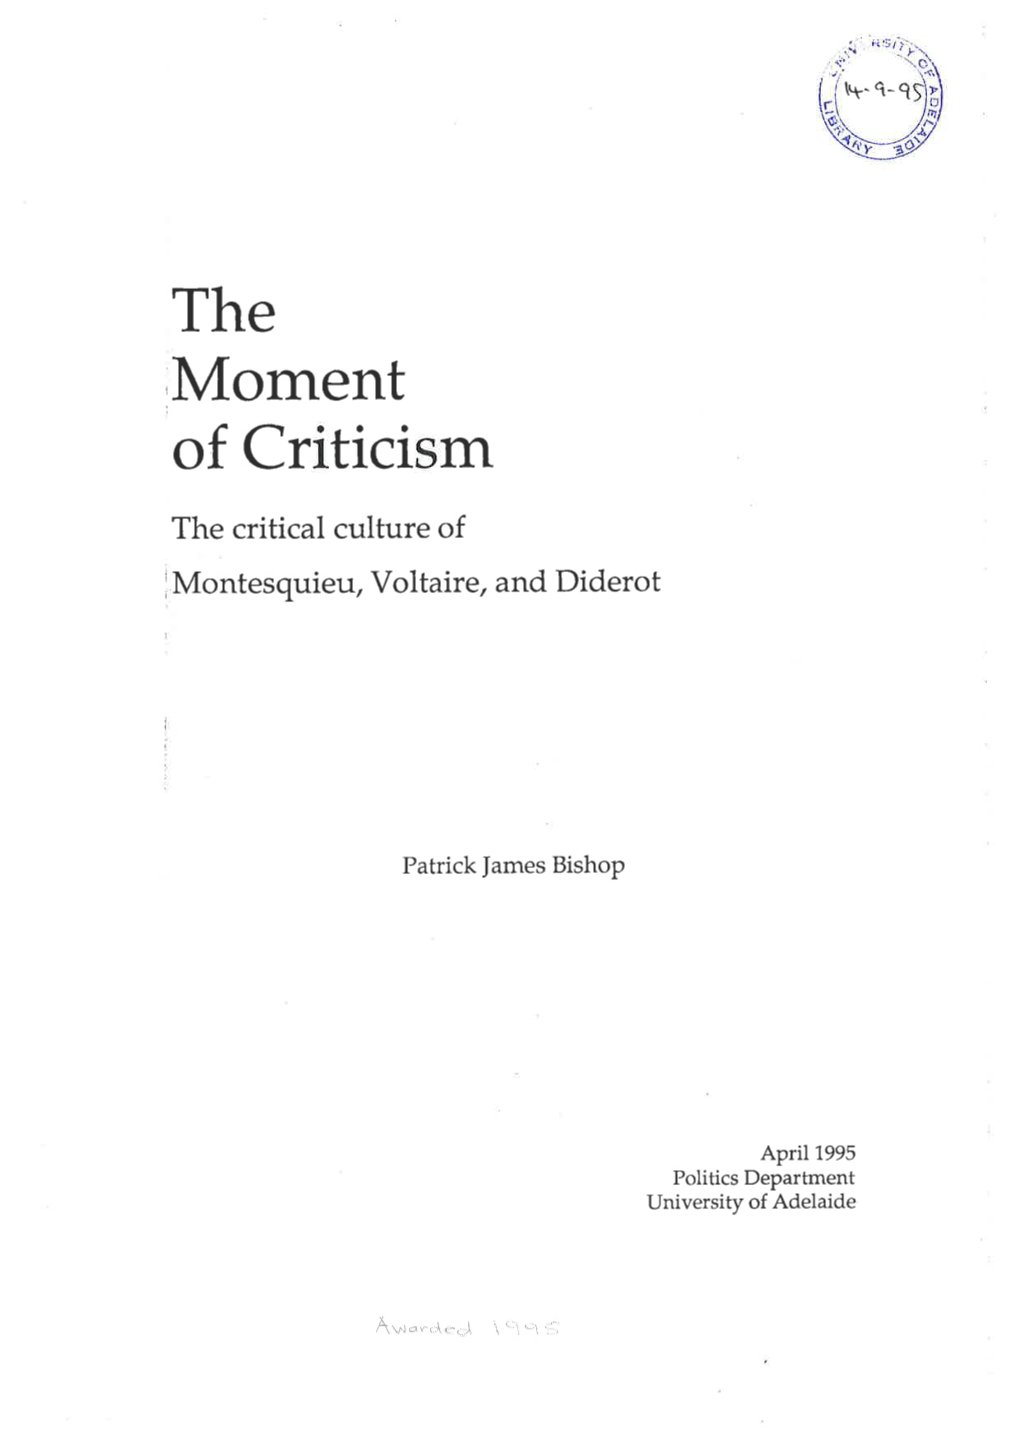 The Moment of Criticism, the Possibilities Upholding the Values of a Critical Culture, - and the Spirit of Enlightenment